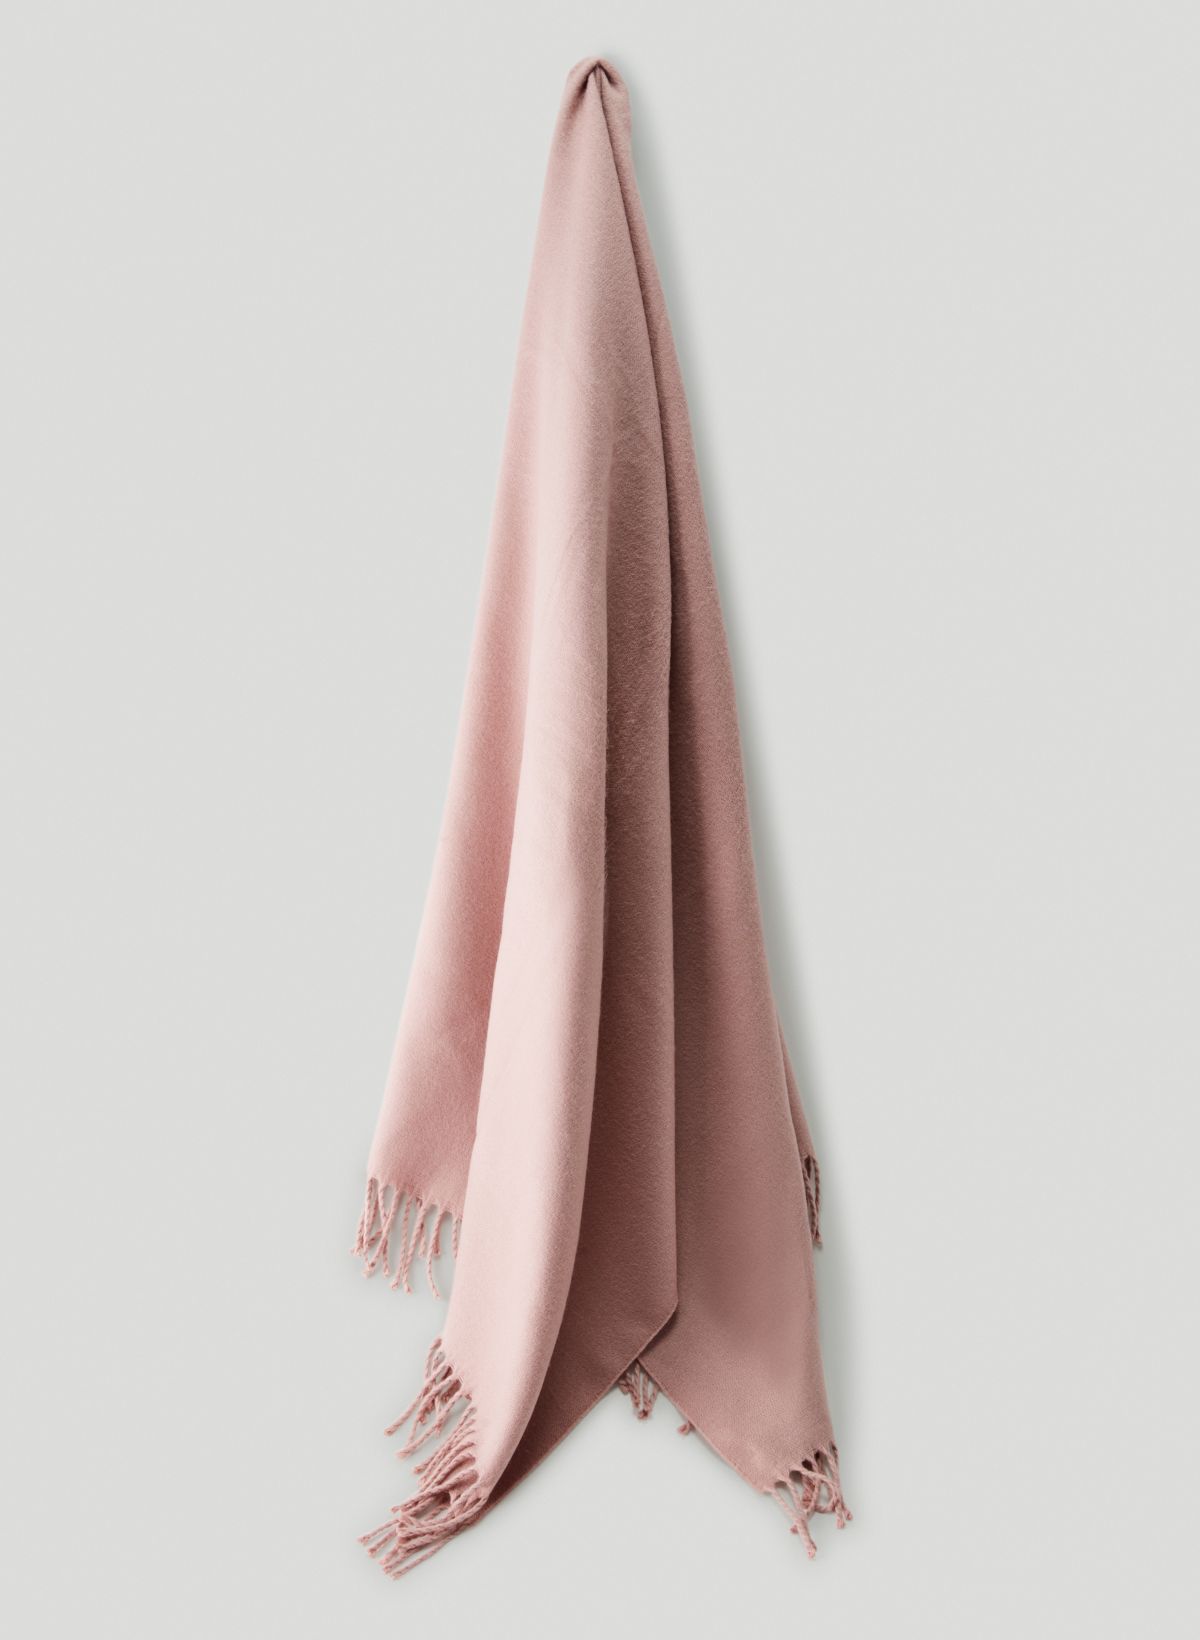 Long scarf with beige logo with fringles. Soft fabric - TopU-Up